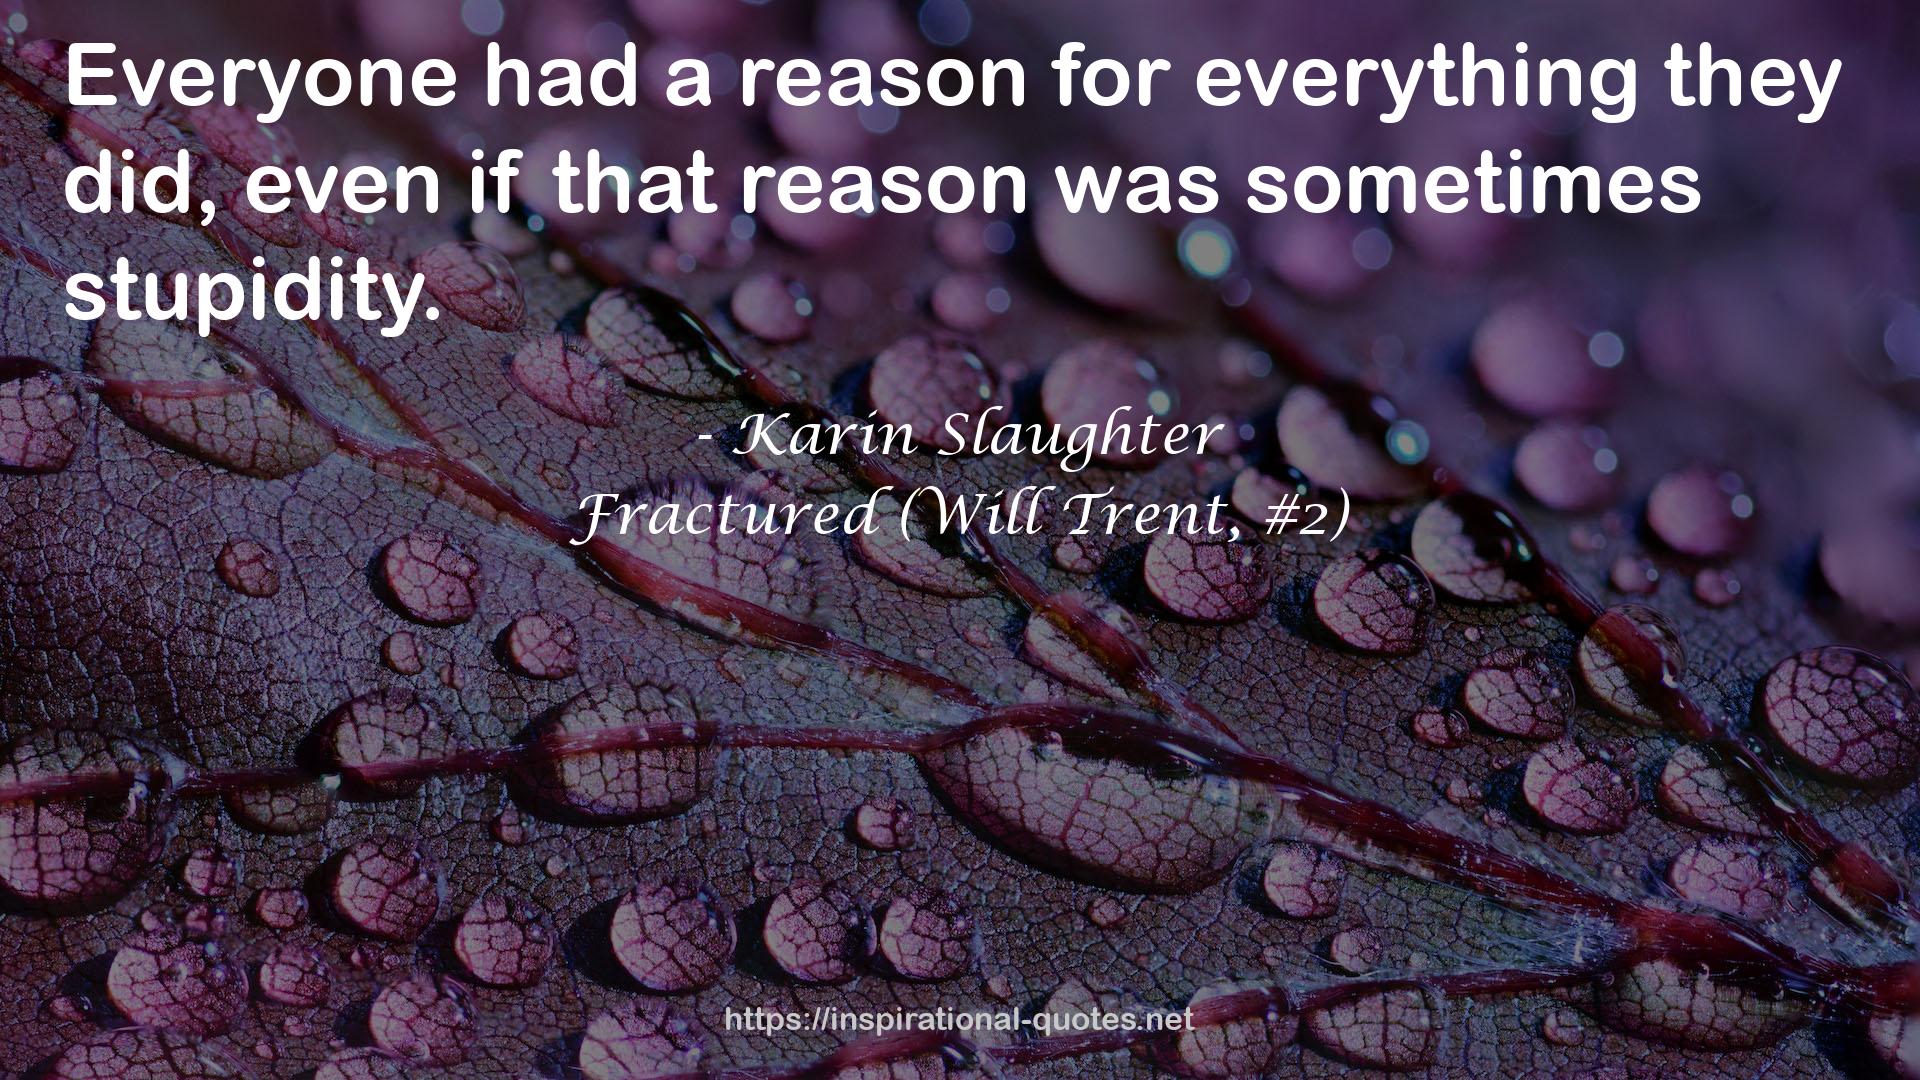 Fractured (Will Trent, #2) QUOTES